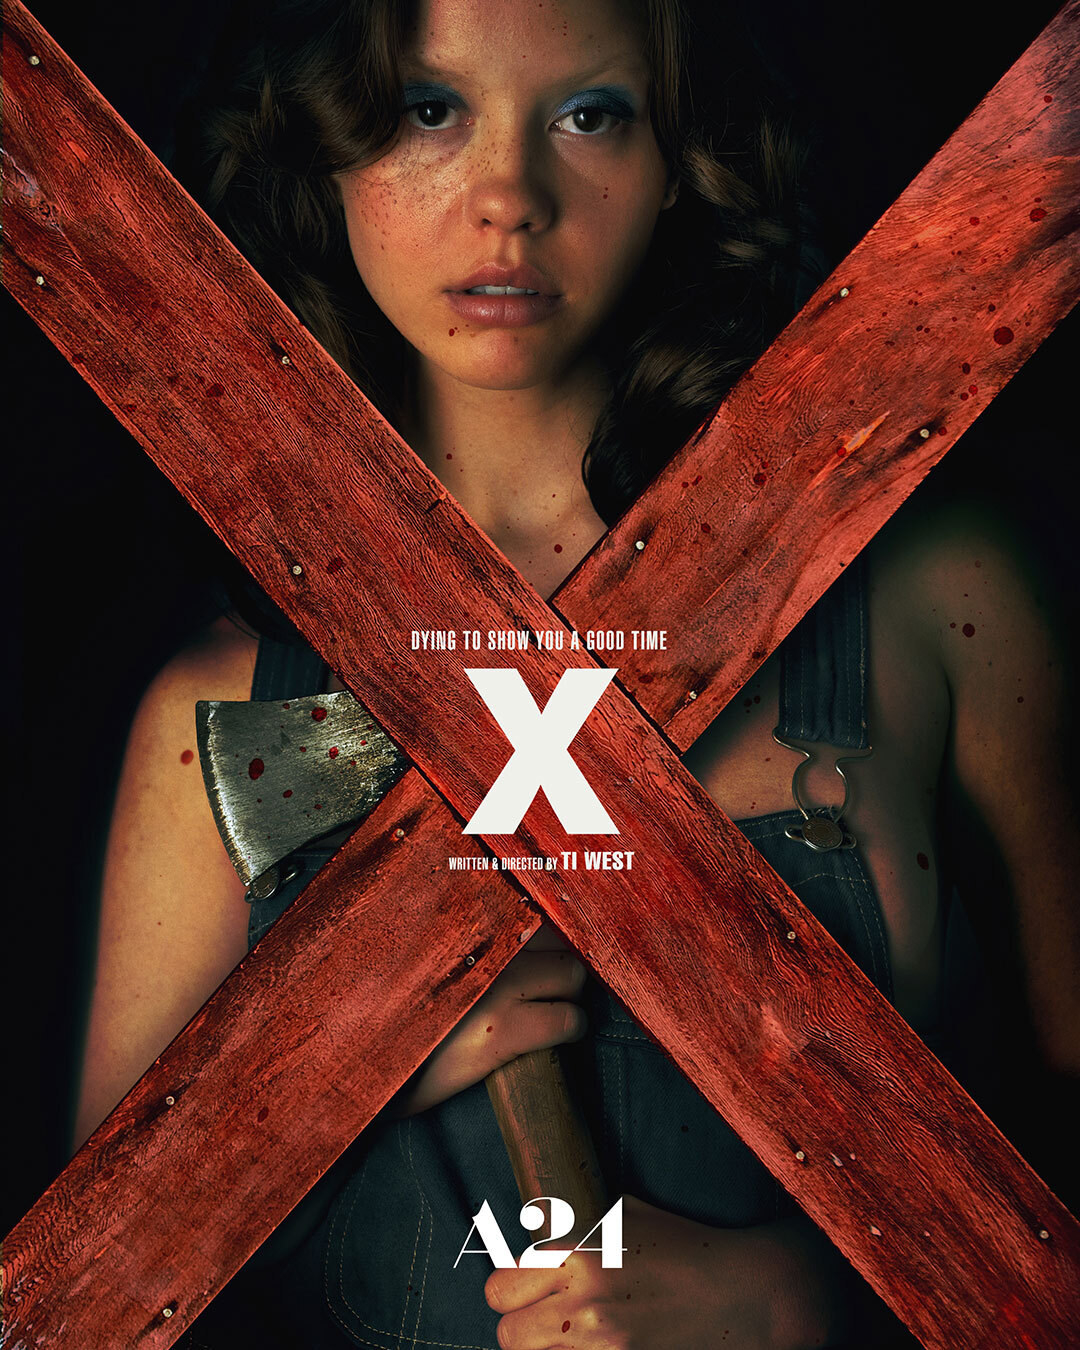 The movie poster for &quot;X.&quot; Mia Goth&#x27;s character Maxine Minx stands holding an axe with blood splatters. There are two red boards that make an X, spanning the entire poster